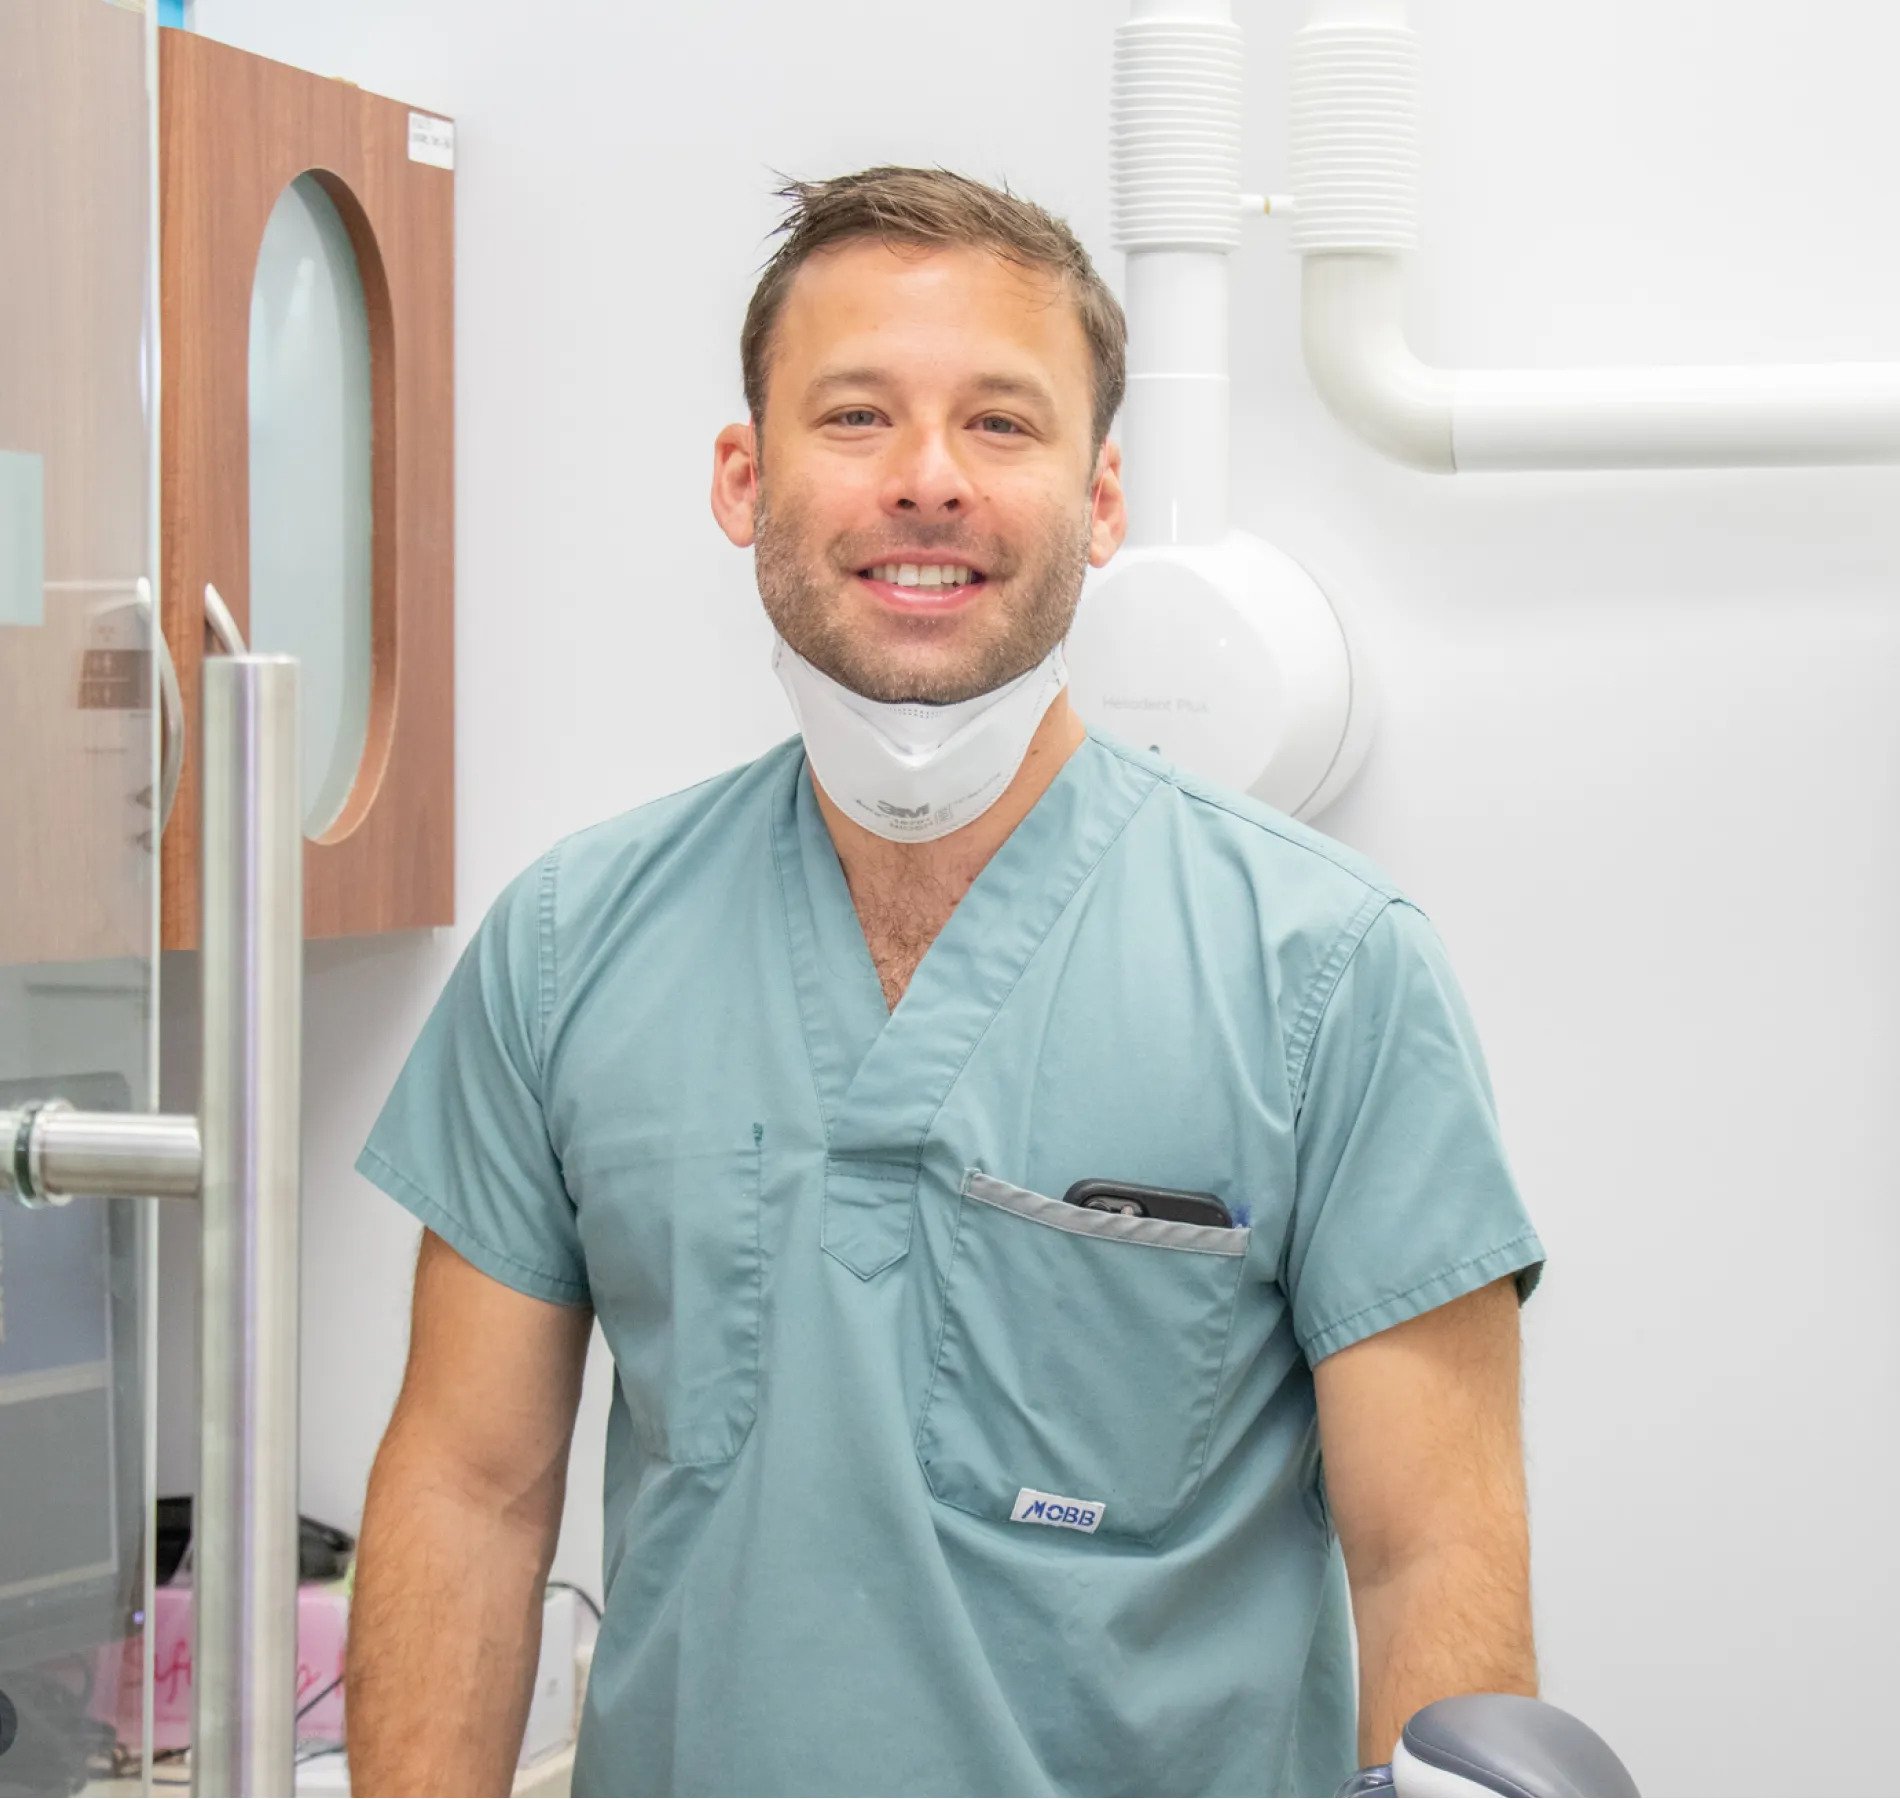 Dr. Ryan Margel is a family dentist in Midtown Toronto